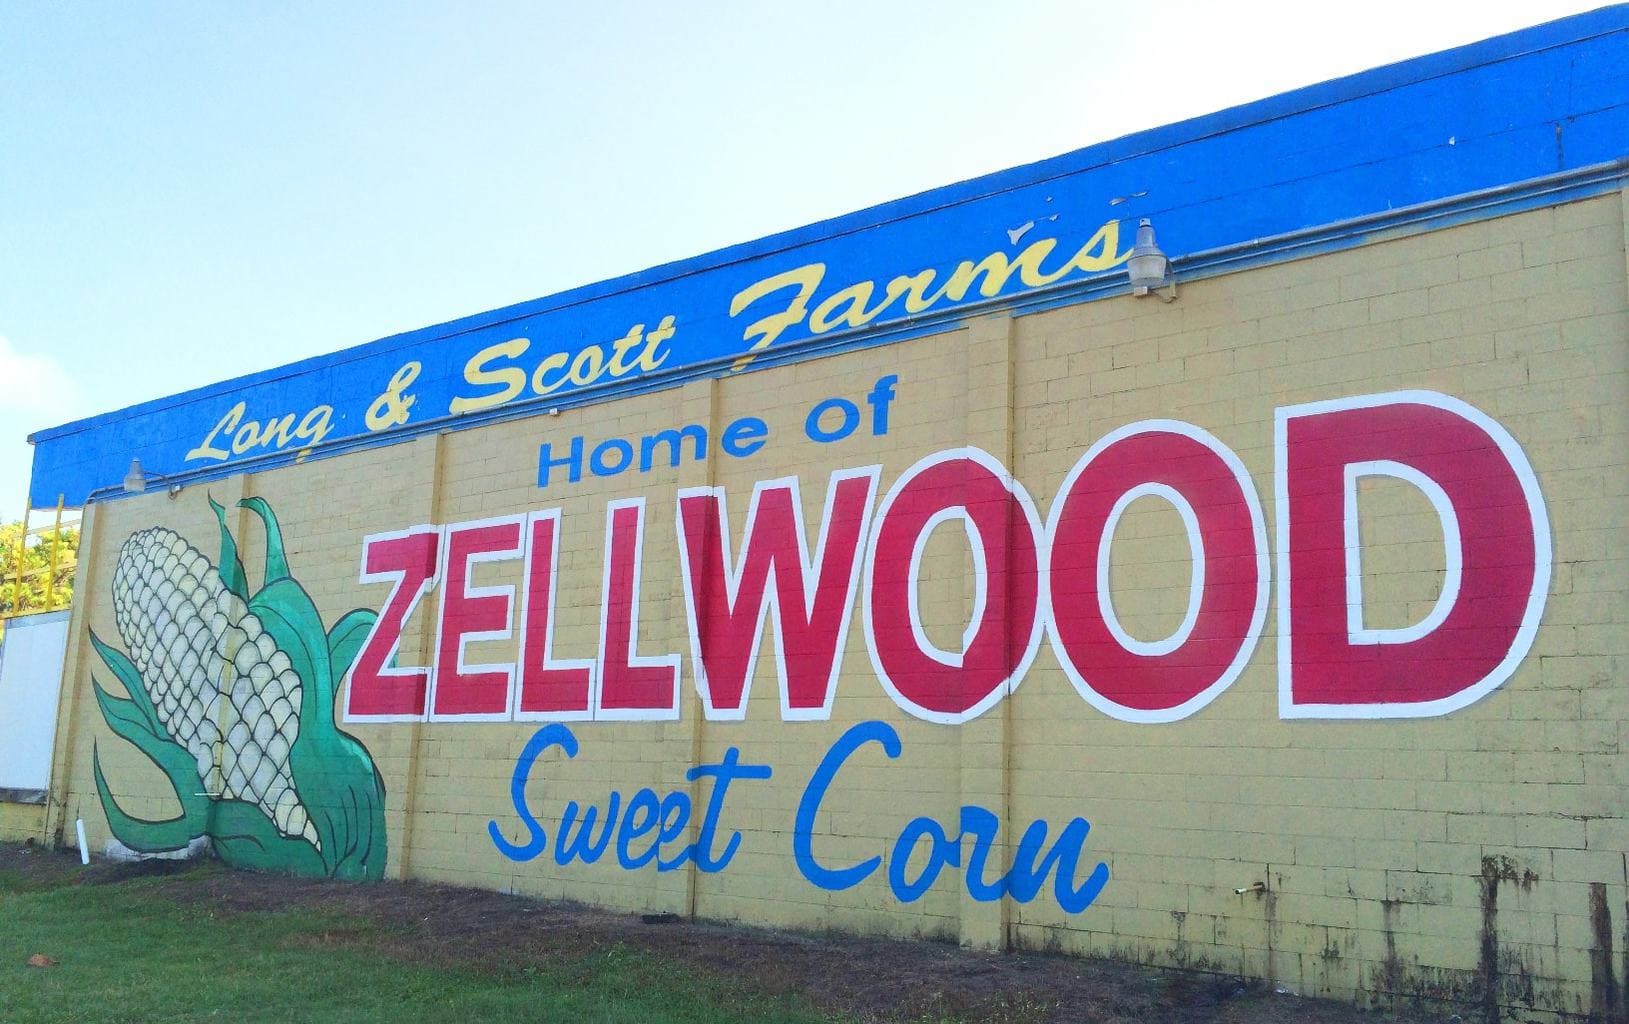 Long and Scott Farms in Zellwood, Florida An Agritourism Visit Kim